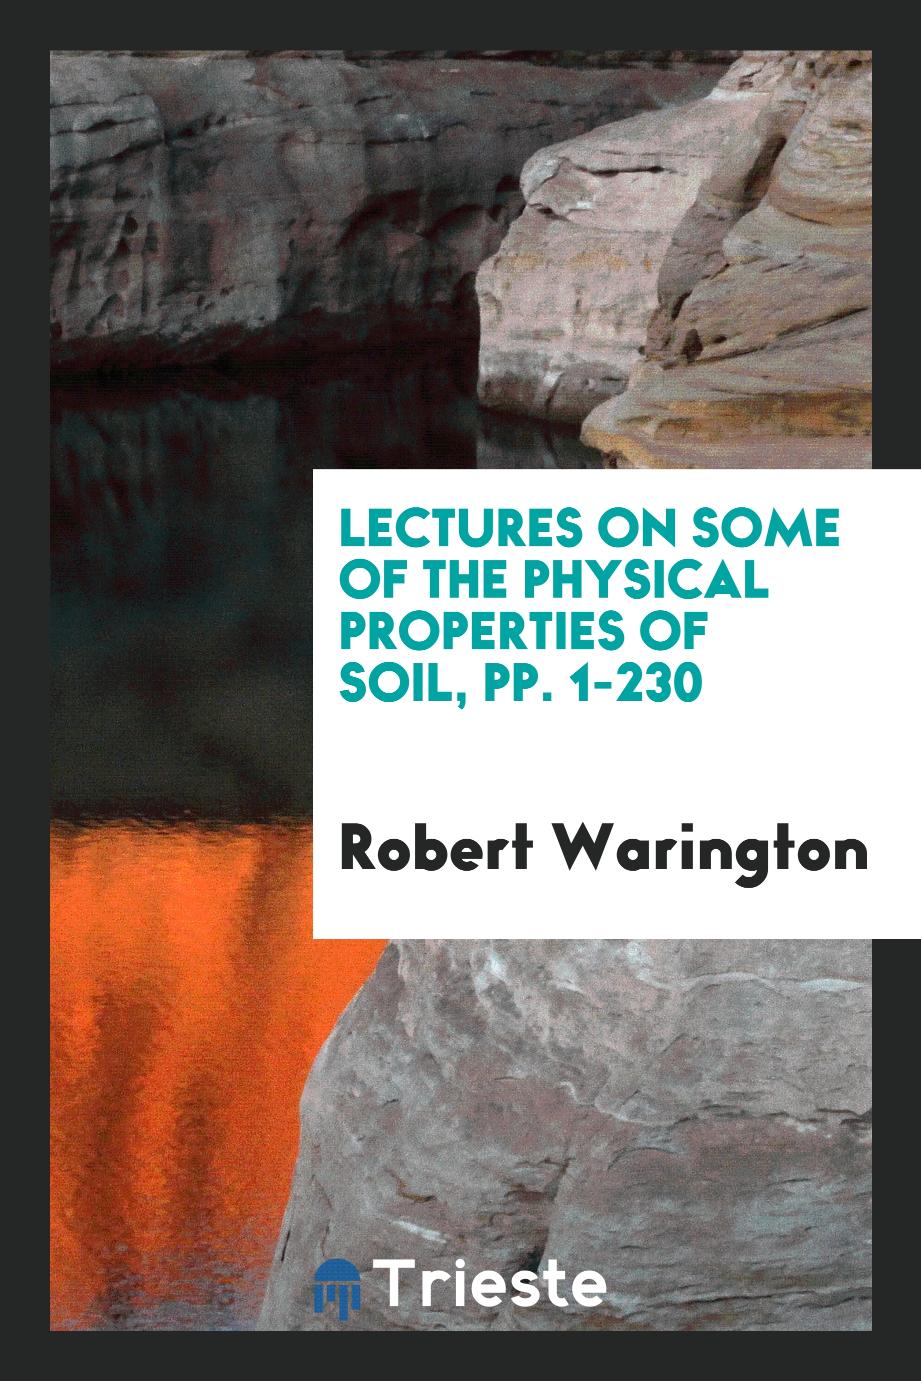 Lectures on Some of the Physical Properties of Soil, pp. 1-230